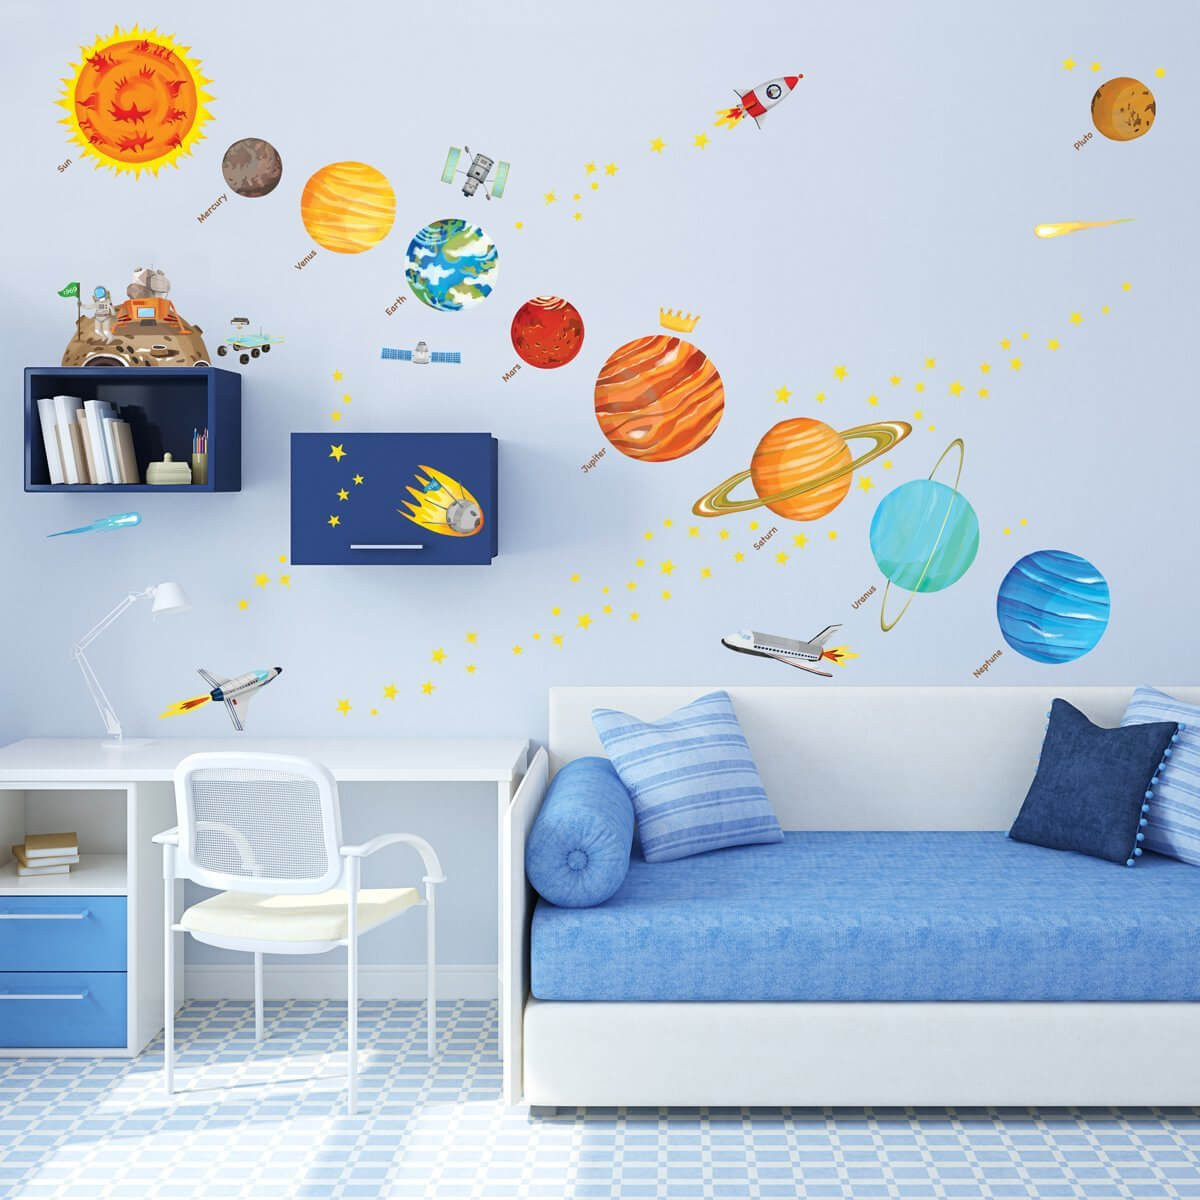 Wall Decor Kids Rooms
 These Educational Wall Ideas are Perfect for Kids